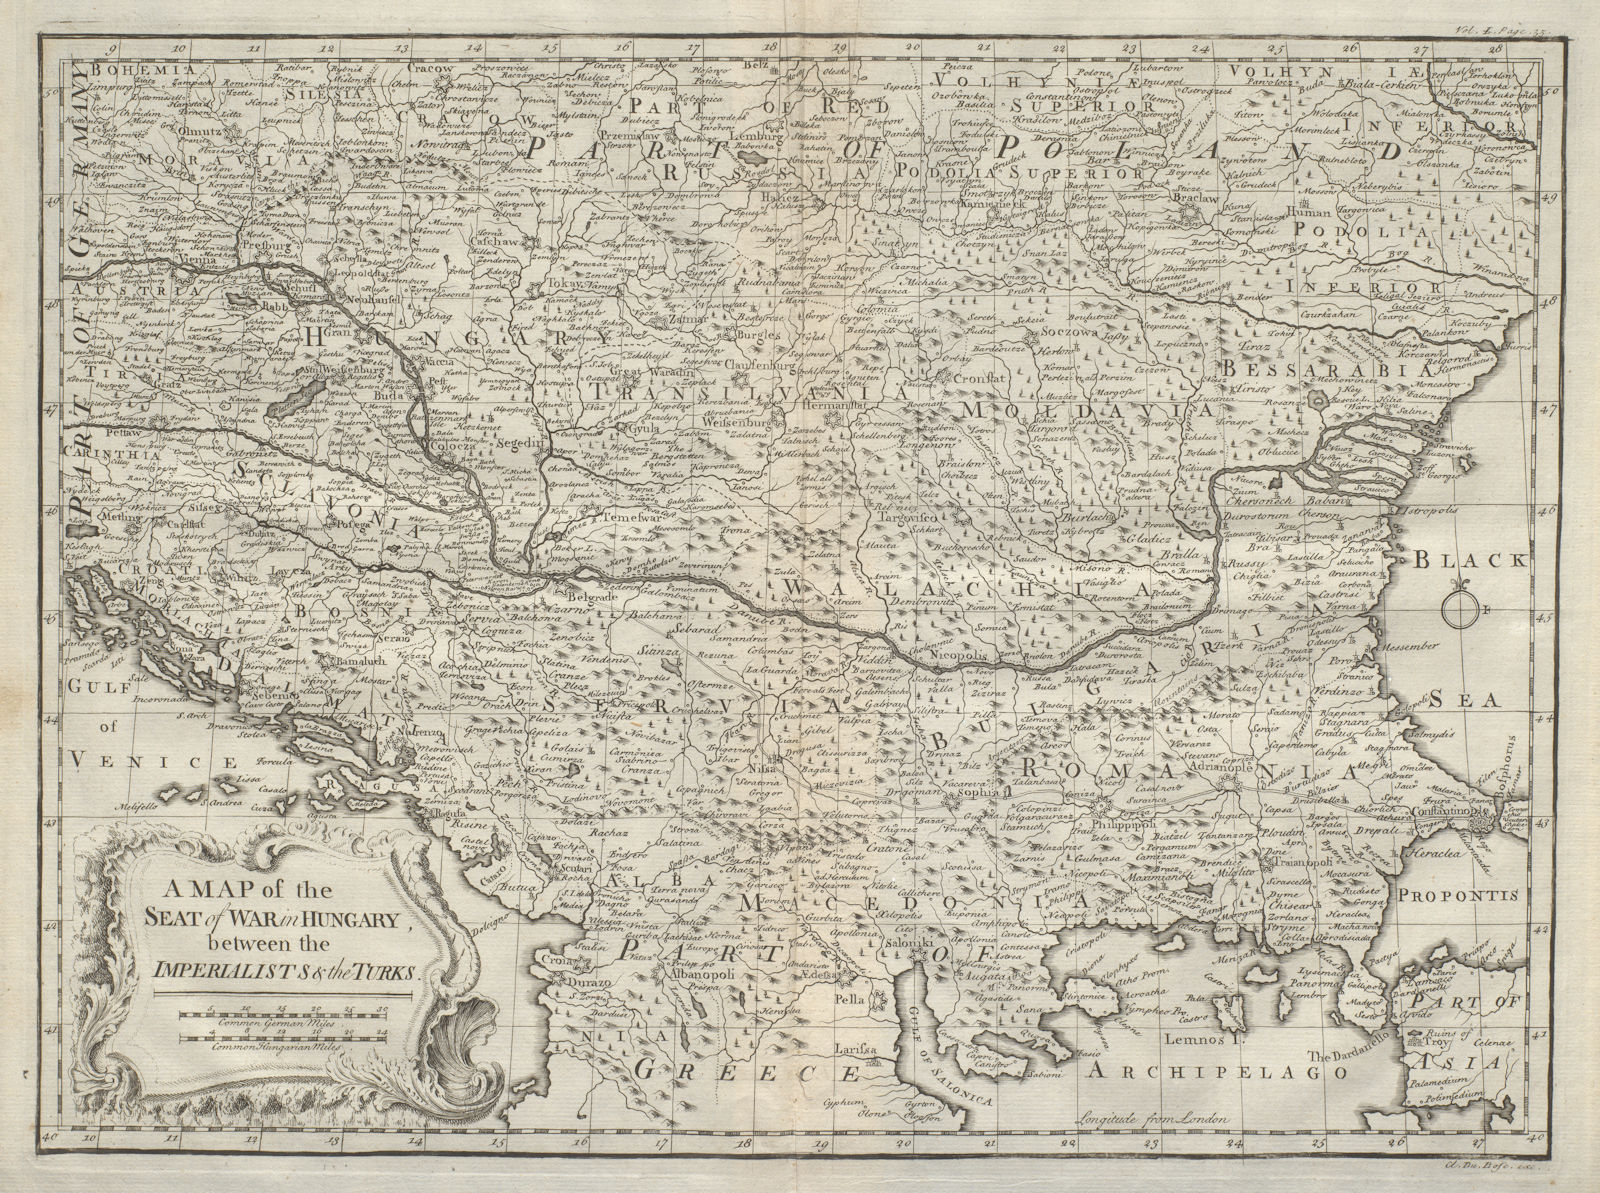 Associate Product Map of the seat of war in Hungary between Imperialists & Turks. DU BOSC 1736